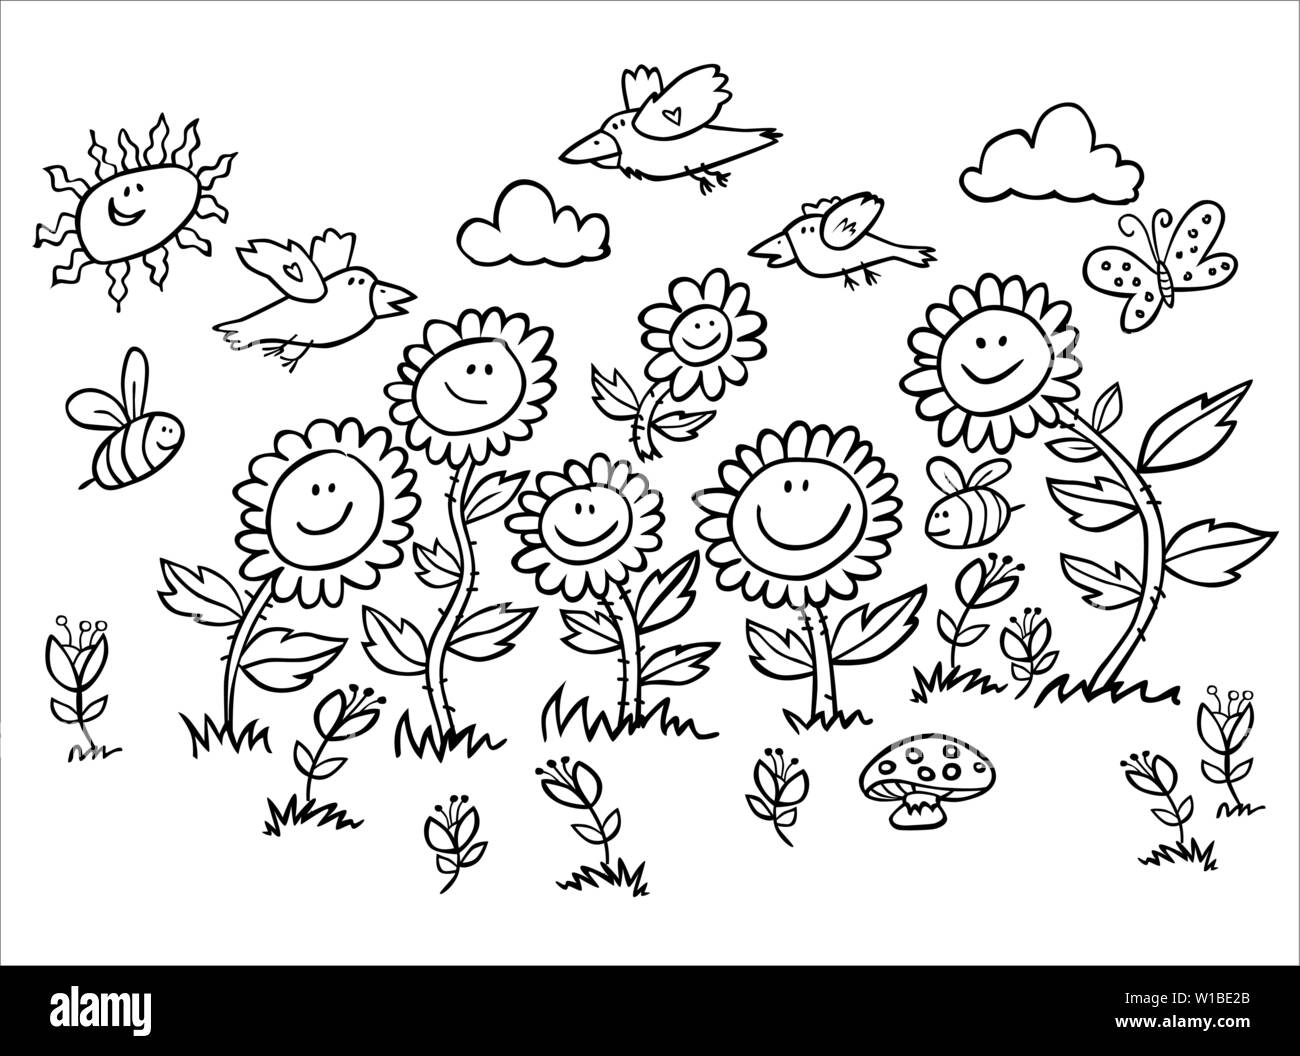 Vector black and white cartoon sunflowers, birds and bees illustration. Suitable for greeting cards or colouring activity sheet. Stock Vector